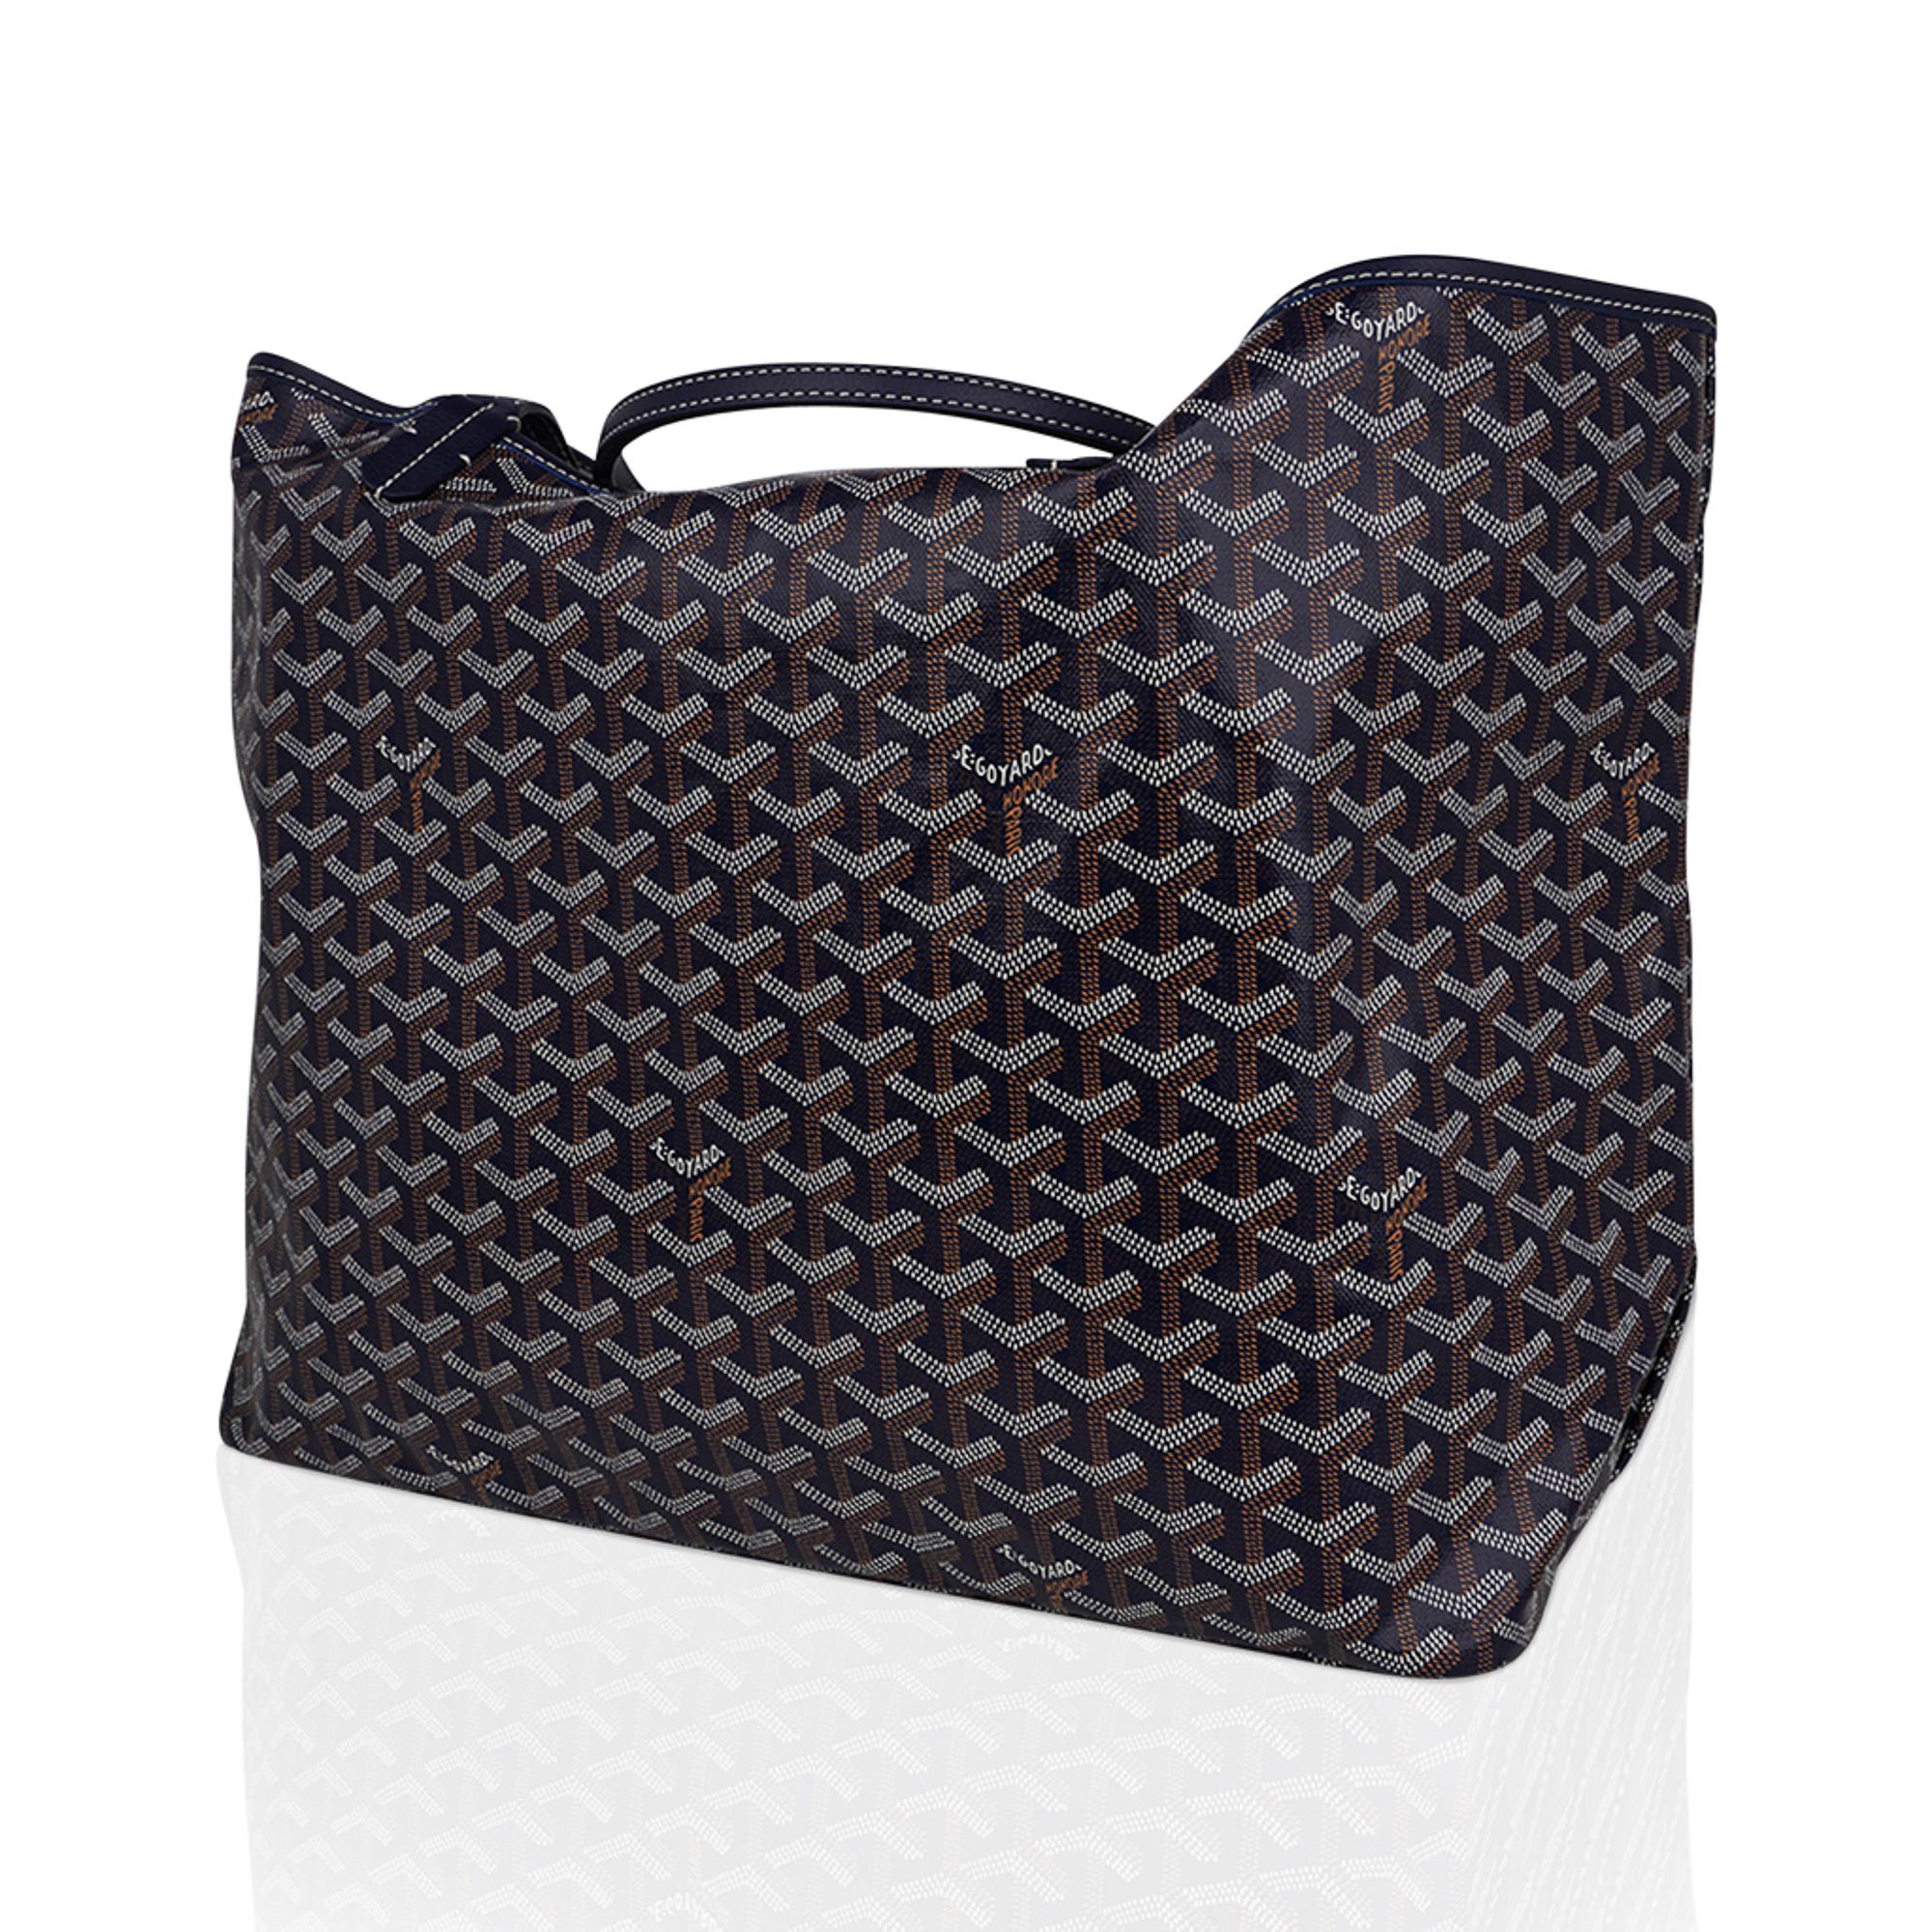 Mightychic offers a Goyard Blue signature GM Saint Louis tote with coated canvas chevron print and calfskin leather trim.
Light weight and spacious this has become a favorite from celebrities to busy moms.
Flat handles are long enough to carry over